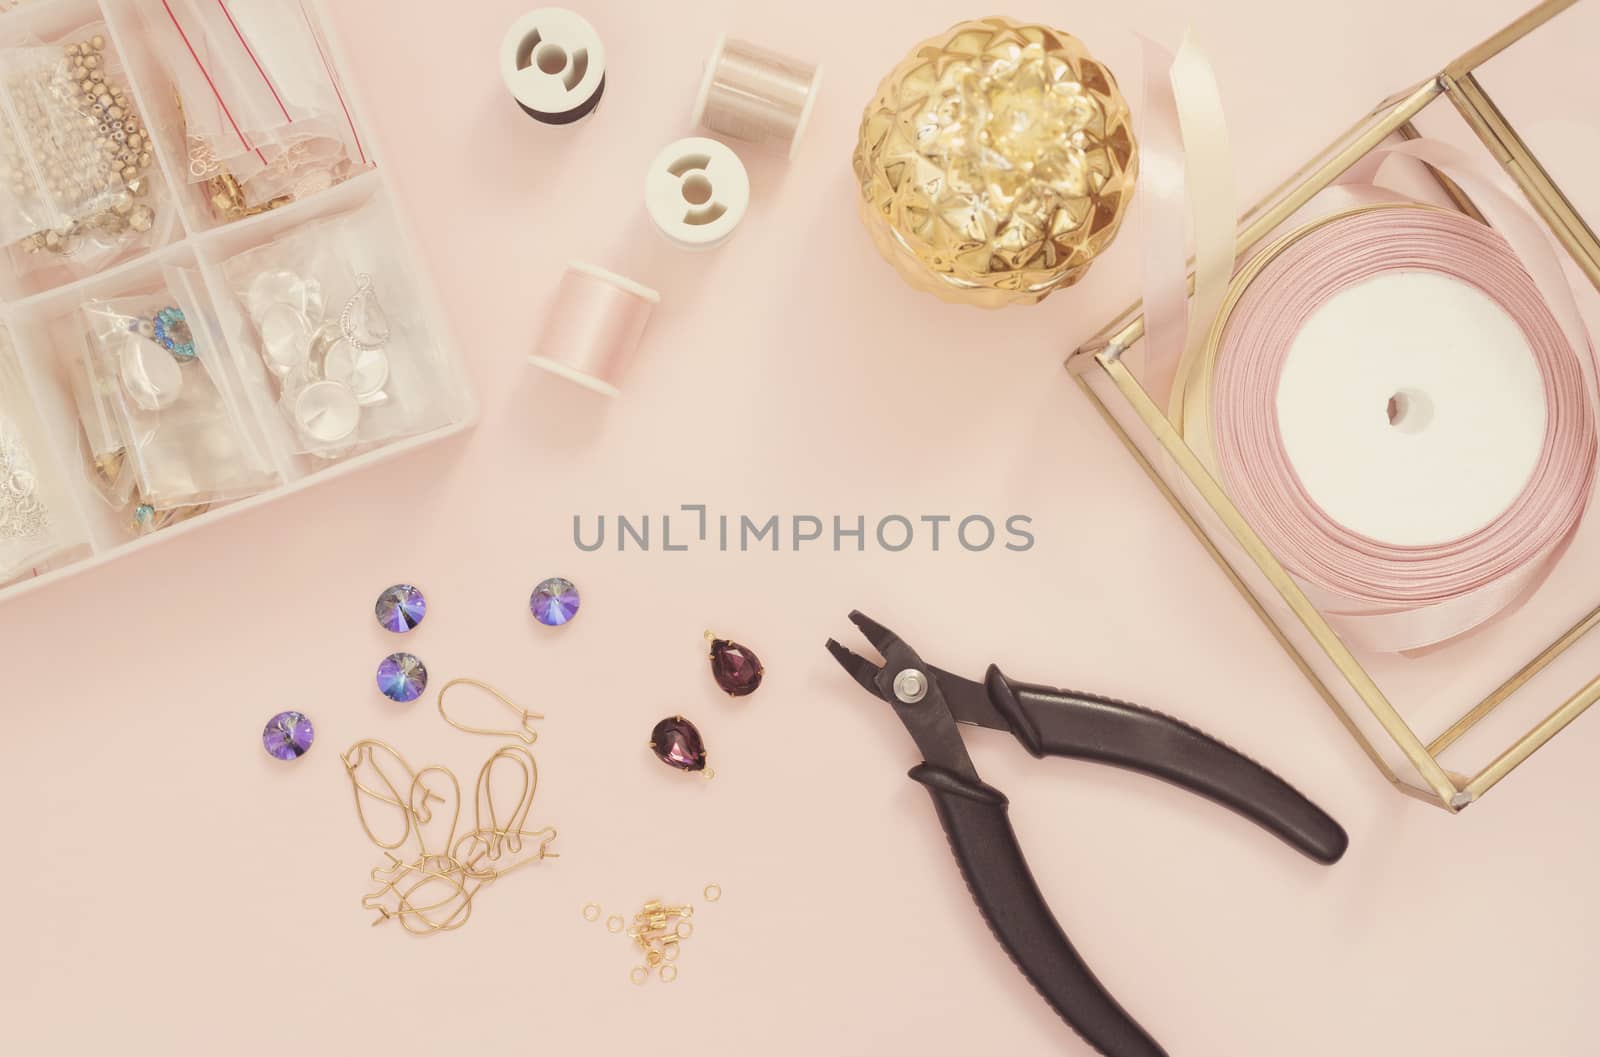 Jewelry designer workplace. Handmade, craft concept. Materials for making jewelry ? pliers, crystals? ear wires, ribbons. Freelance workspace in flat lay style. Pastel pink and gold.